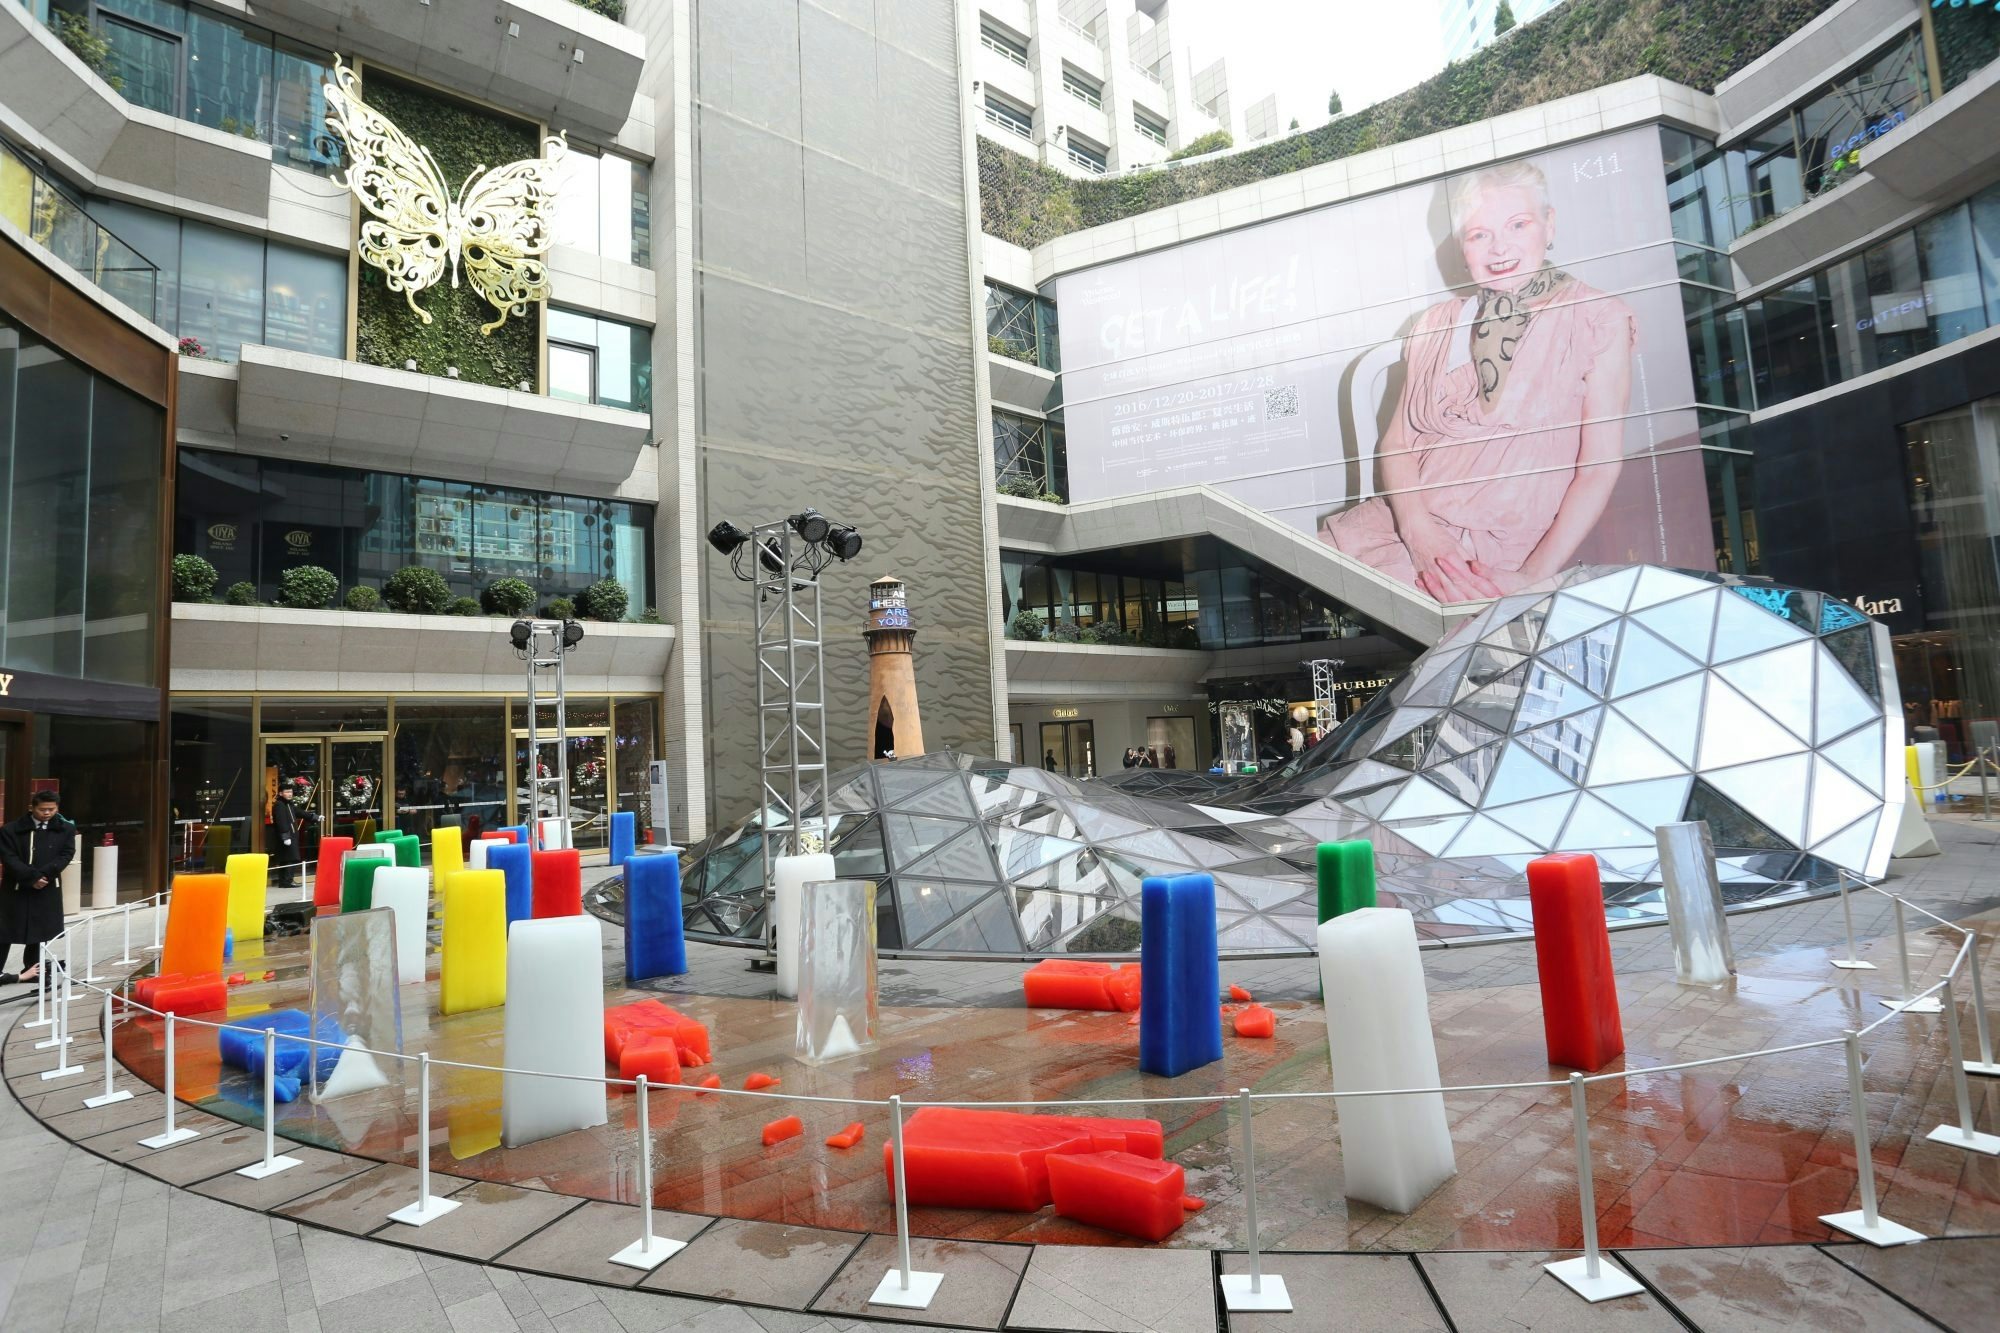 Liu Zhenchen's "Ice Mountain," a green themed installation in light of the Vivienne Westwood exhibition, is on display outside K11 Art Mall. (Courtesy Photo)